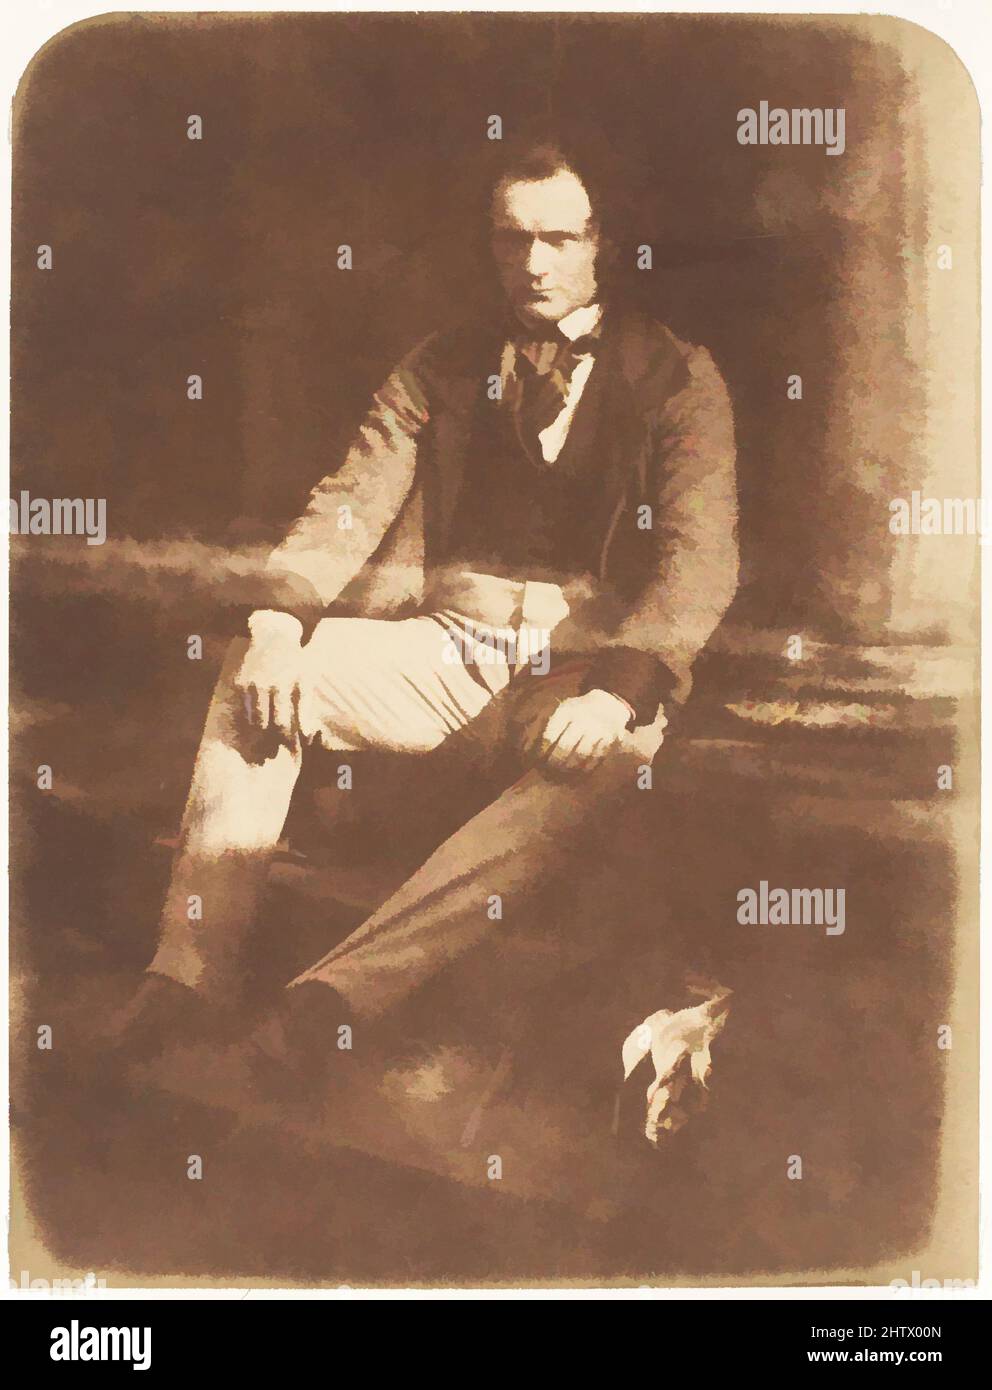 Art inspired by Thomas Duncan, 1843–47, Salted paper print from paper negative, Photographs, David Octavius Hill (British, Perth, Scotland 1802–1870 Edinburgh, Scotland), Robert Adamson (British, St. Andrews, Scotland 1821–1848 St. Andrews, Scotland, Classic works modernized by Artotop with a splash of modernity. Shapes, color and value, eye-catching visual impact on art. Emotions through freedom of artworks in a contemporary way. A timeless message pursuing a wildly creative new direction. Artists turning to the digital medium and creating the Artotop NFT Stock Photo